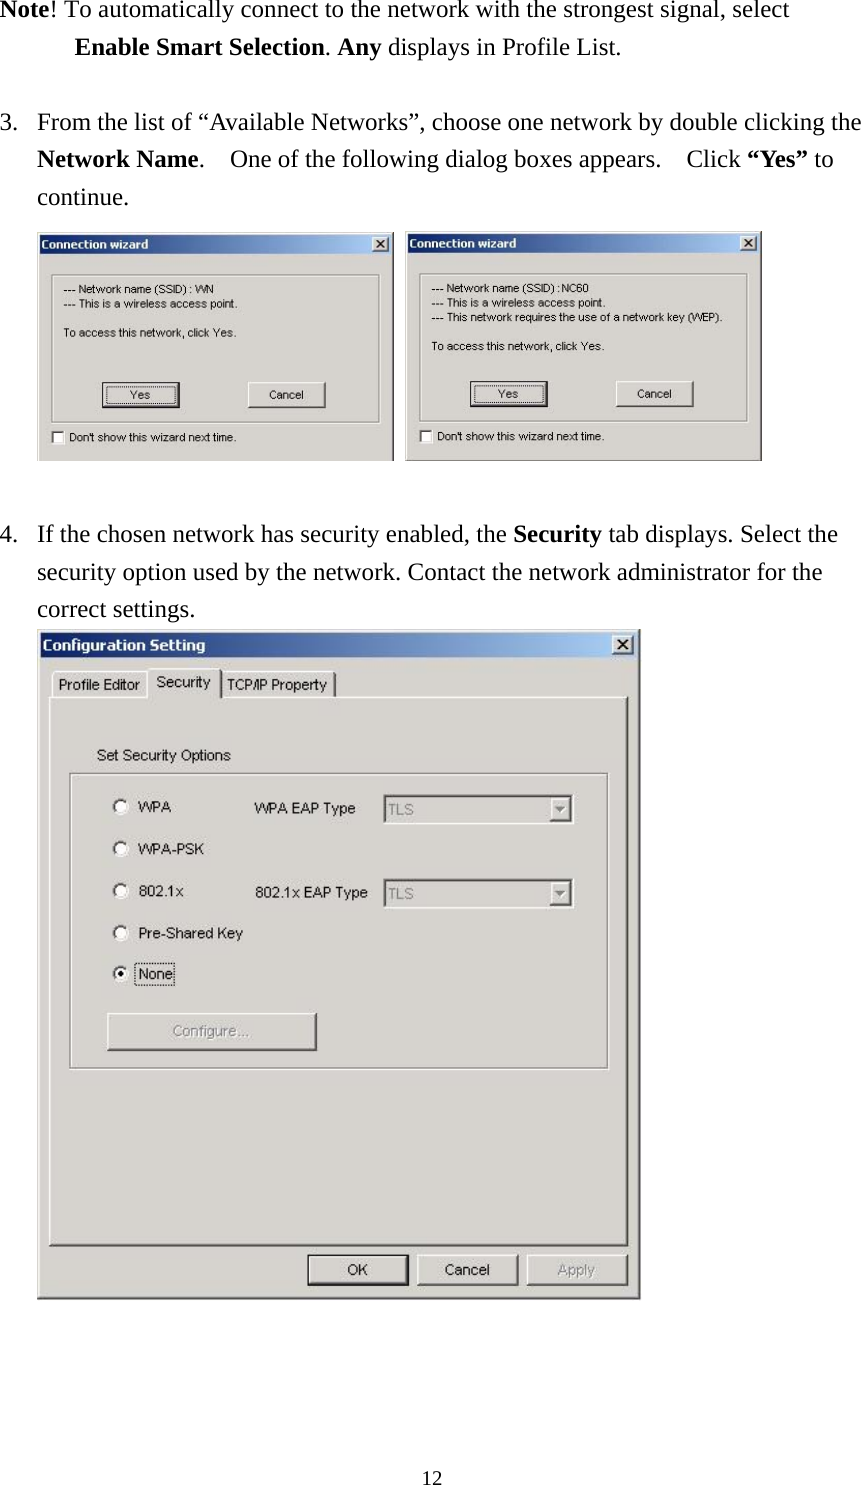  12Note! To automatically connect to the network with the strongest signal, select Enable Smart Selection. Any displays in Profile List.  3.  From the list of “Available Networks”, choose one network by double clicking the Network Name.    One of the following dialog boxes appears.    Click “Yes” to continue.     4.  If the chosen network has security enabled, the Security tab displays. Select the security option used by the network. Contact the network administrator for the correct settings.     